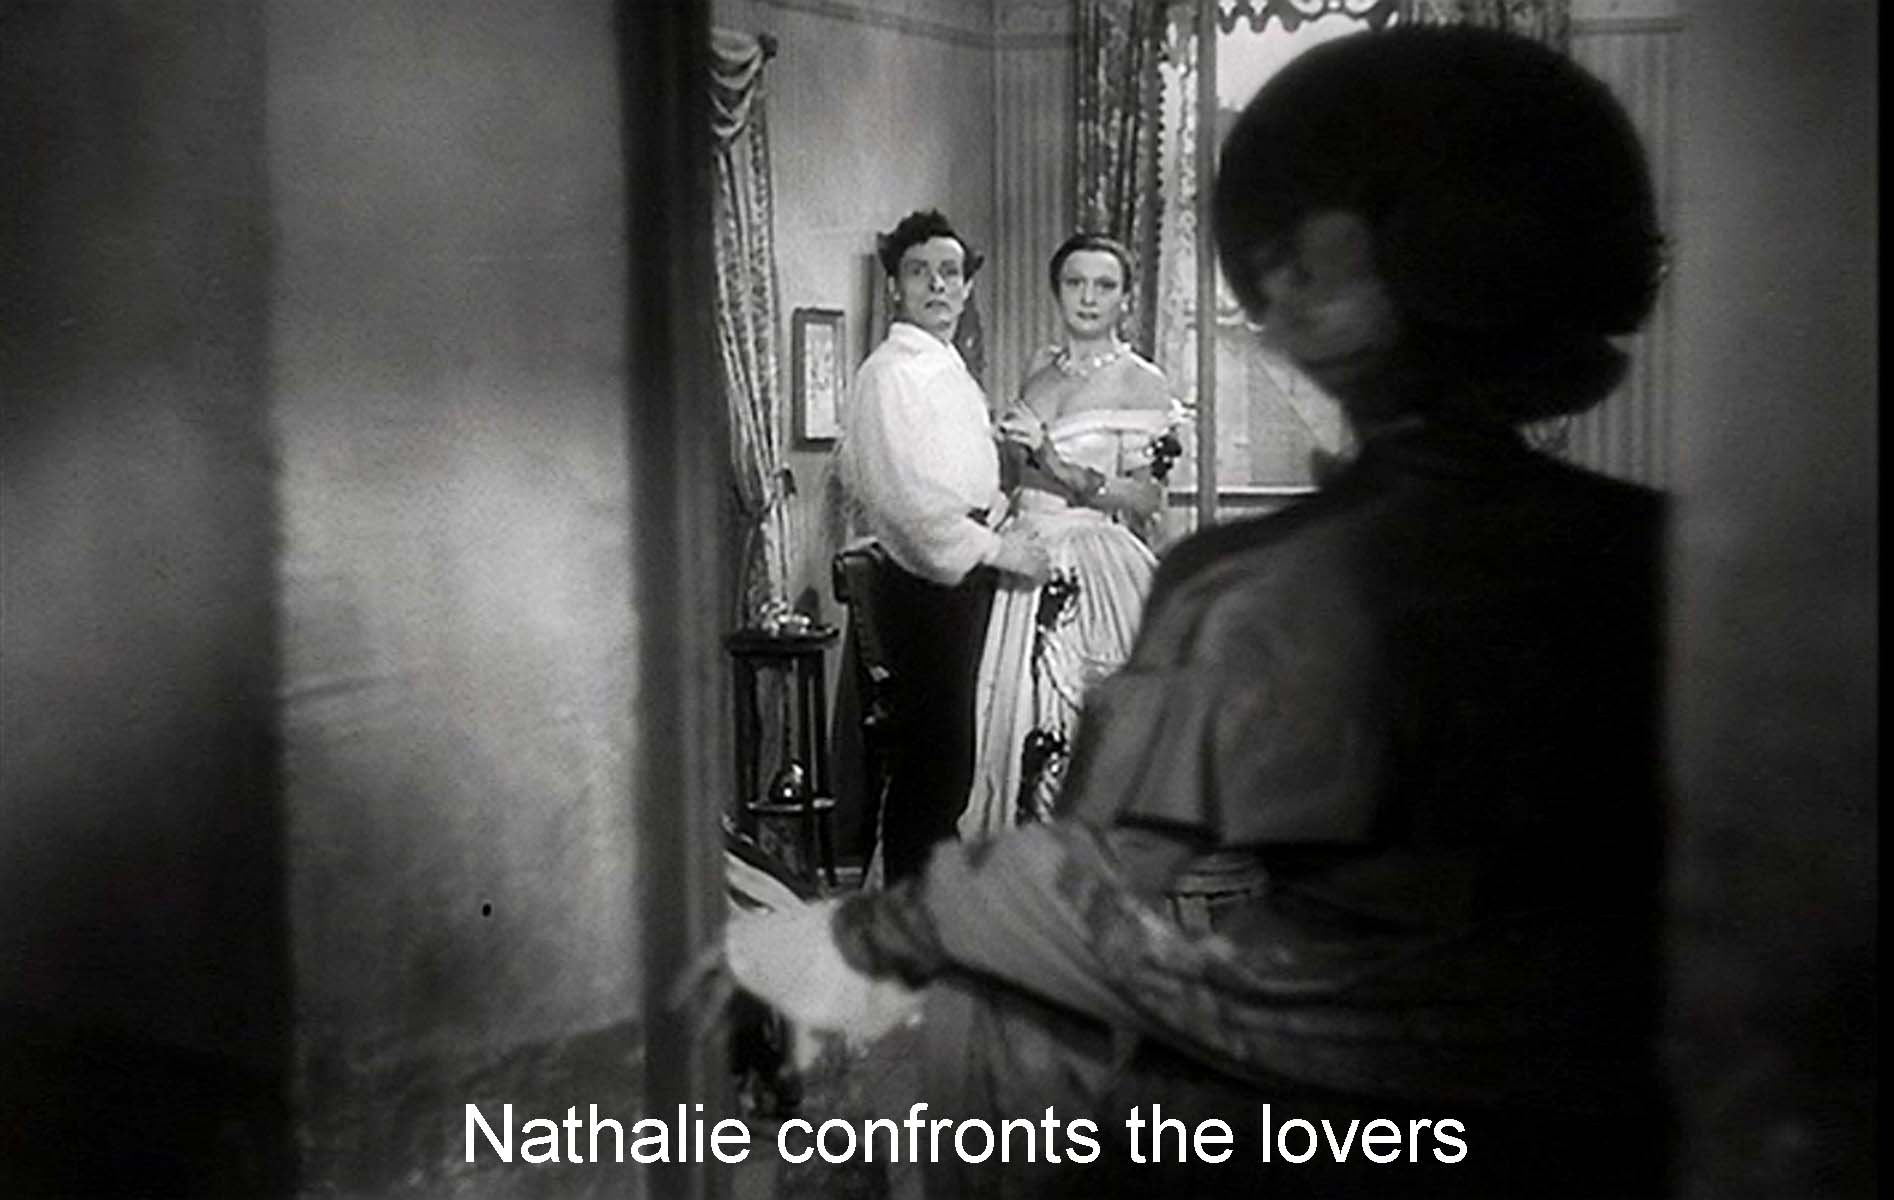 Nathalie confronts the lovers